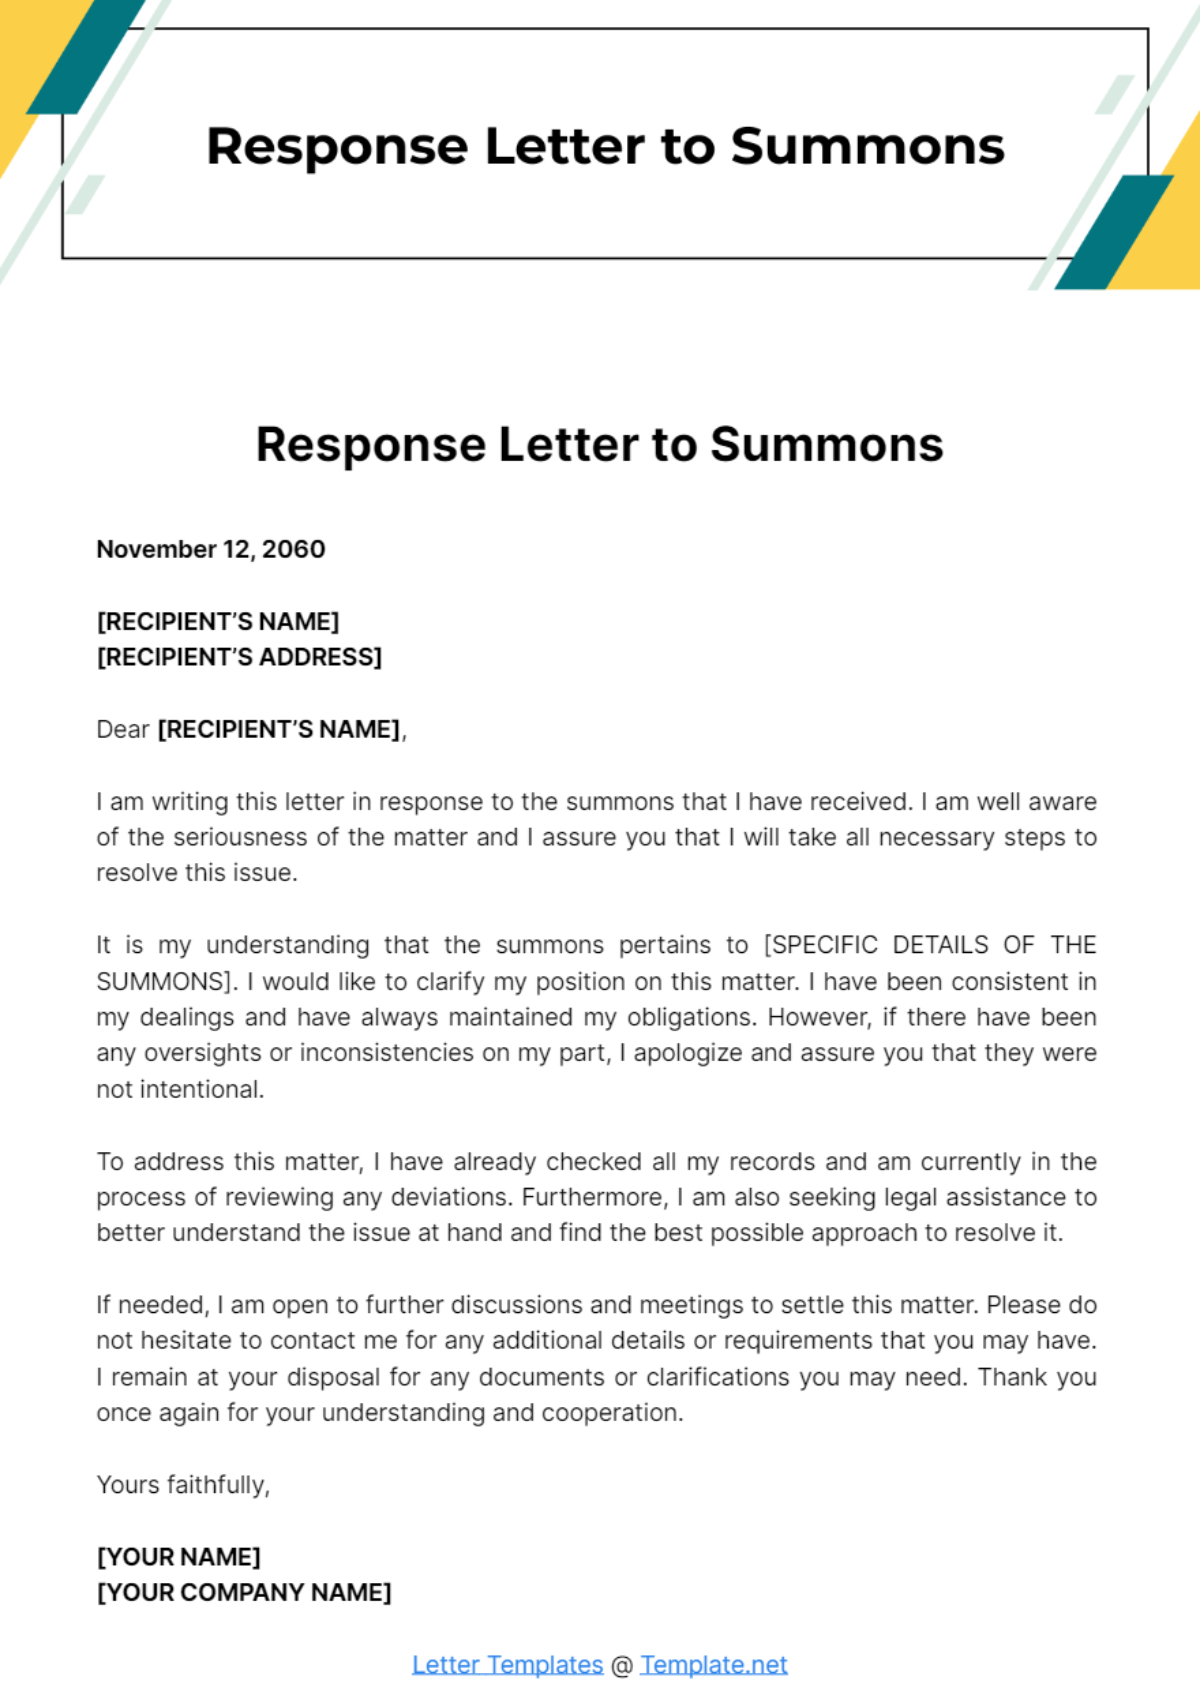 Free Response Letter to Summons Template